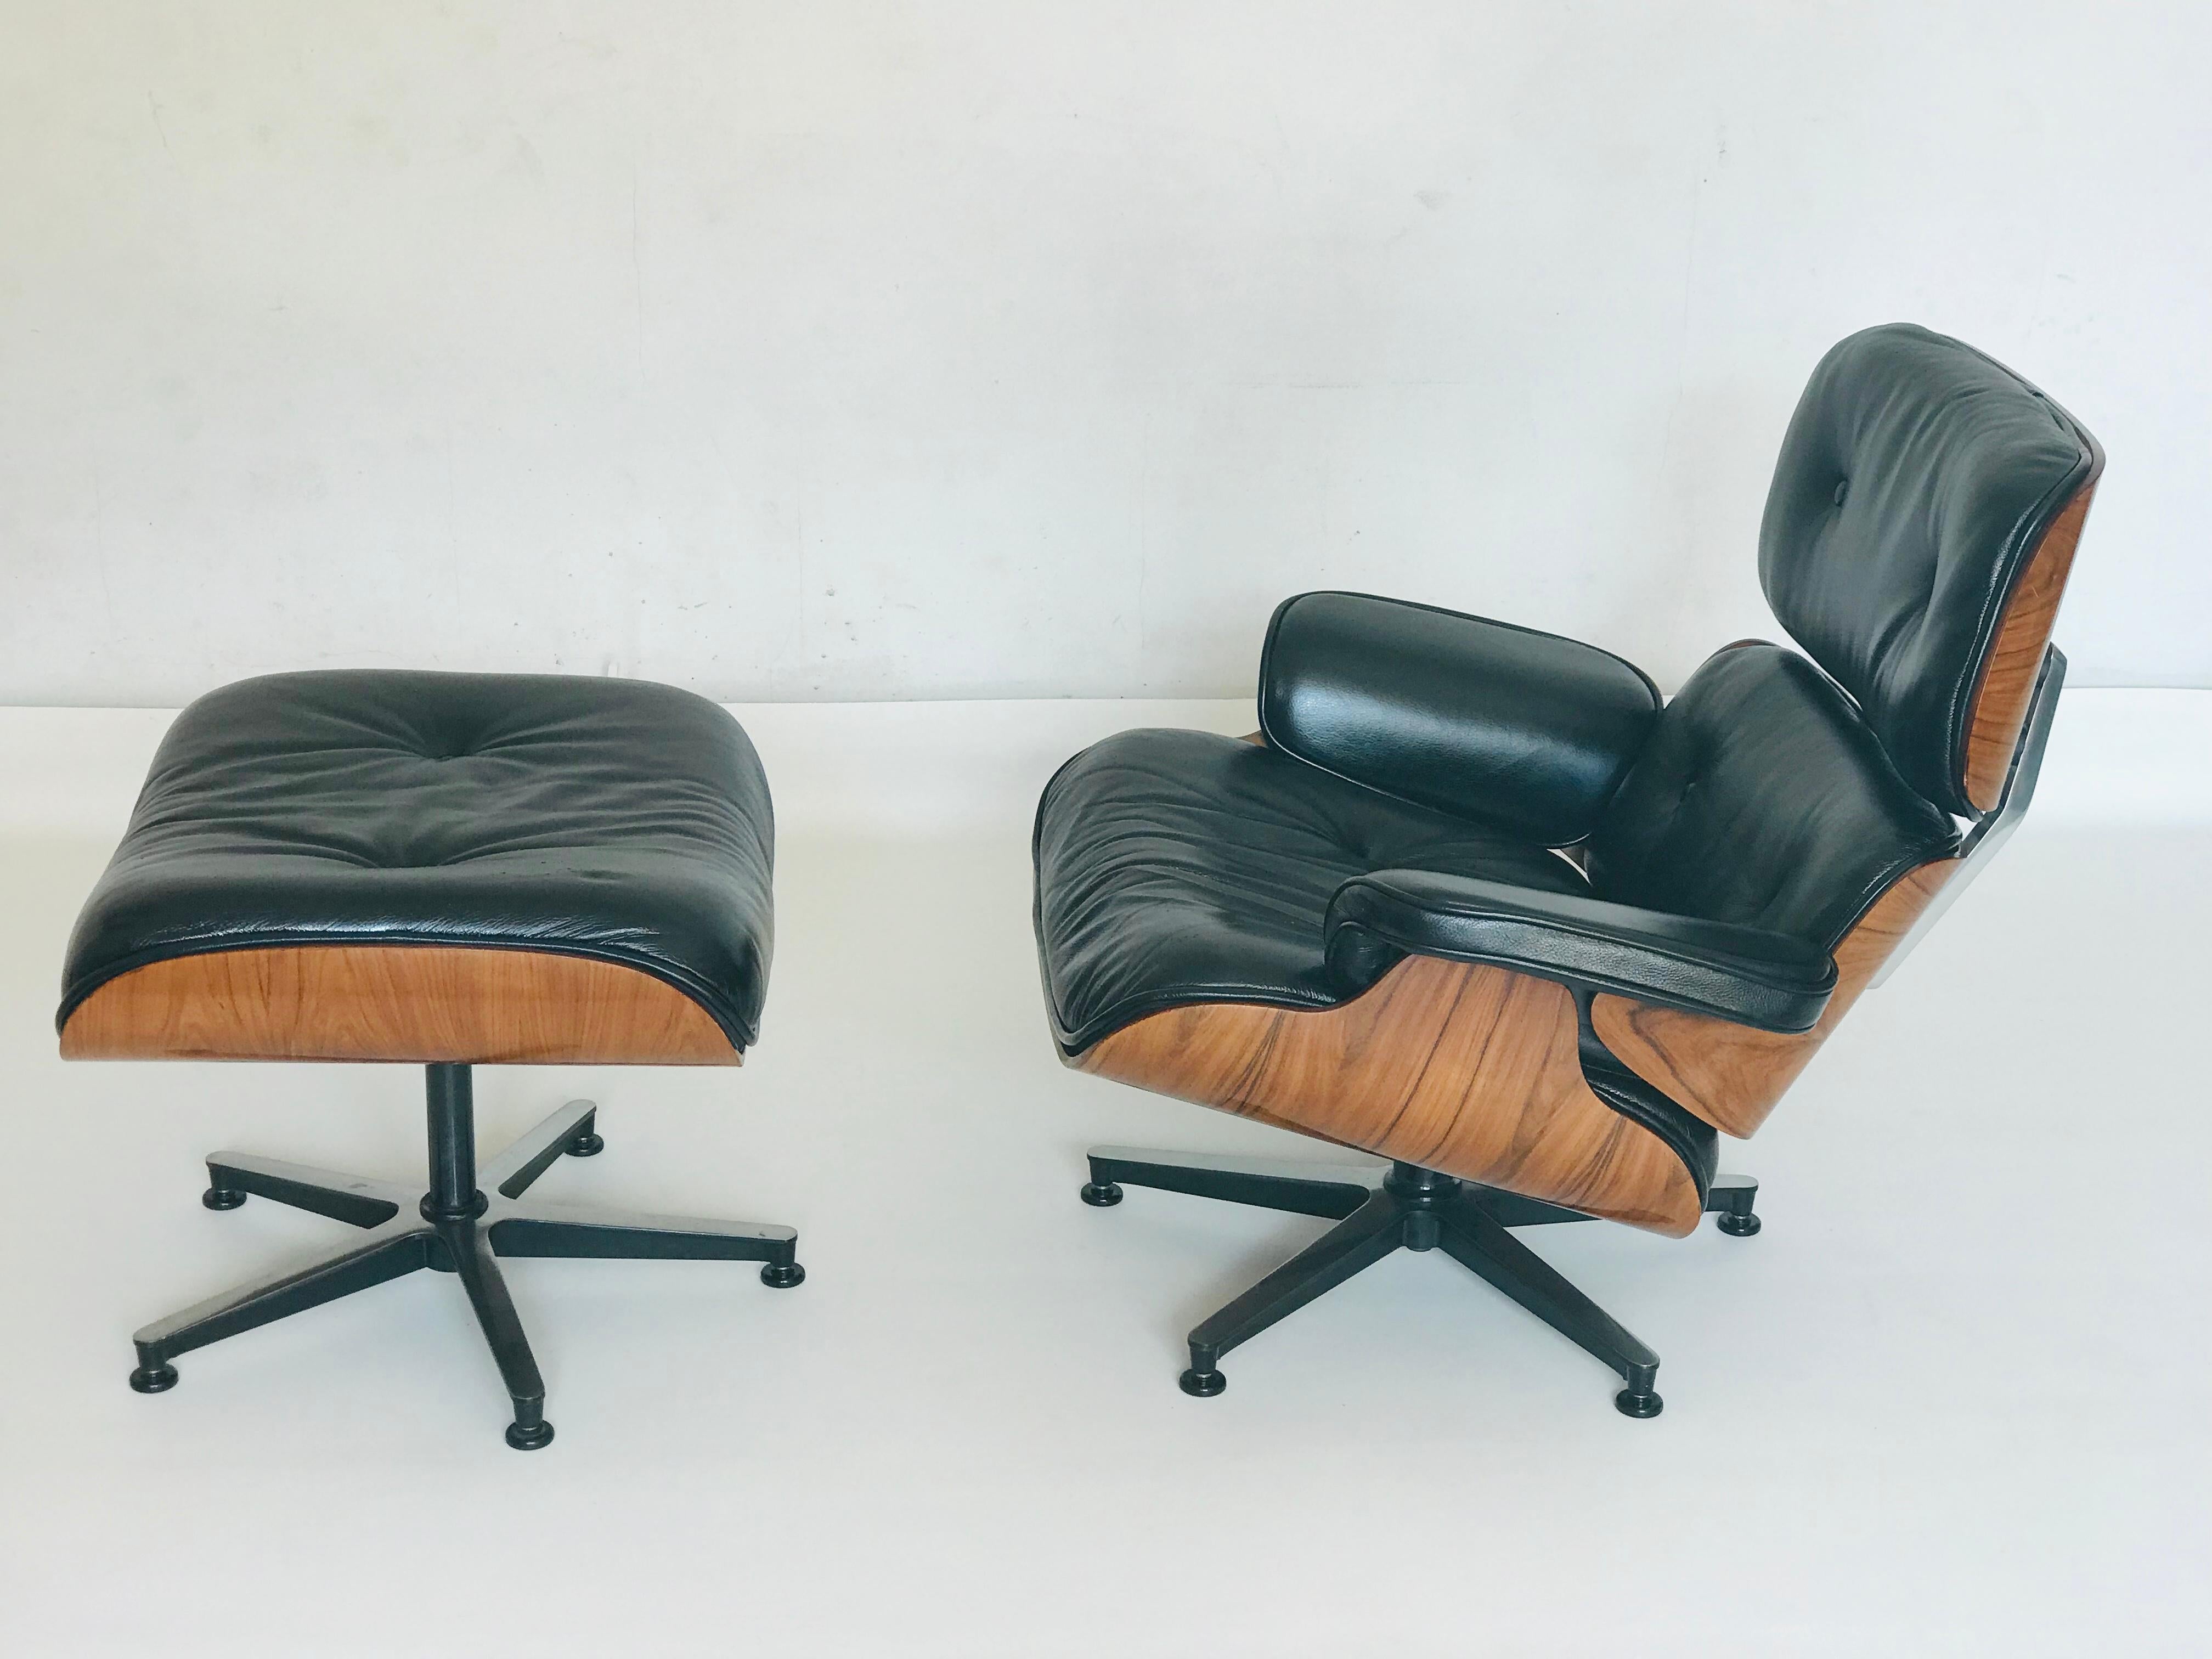 Machine-Made Set of Charles Ray Eames Lounge Chair and Ottoman 670 and 671, Black Leather For Sale